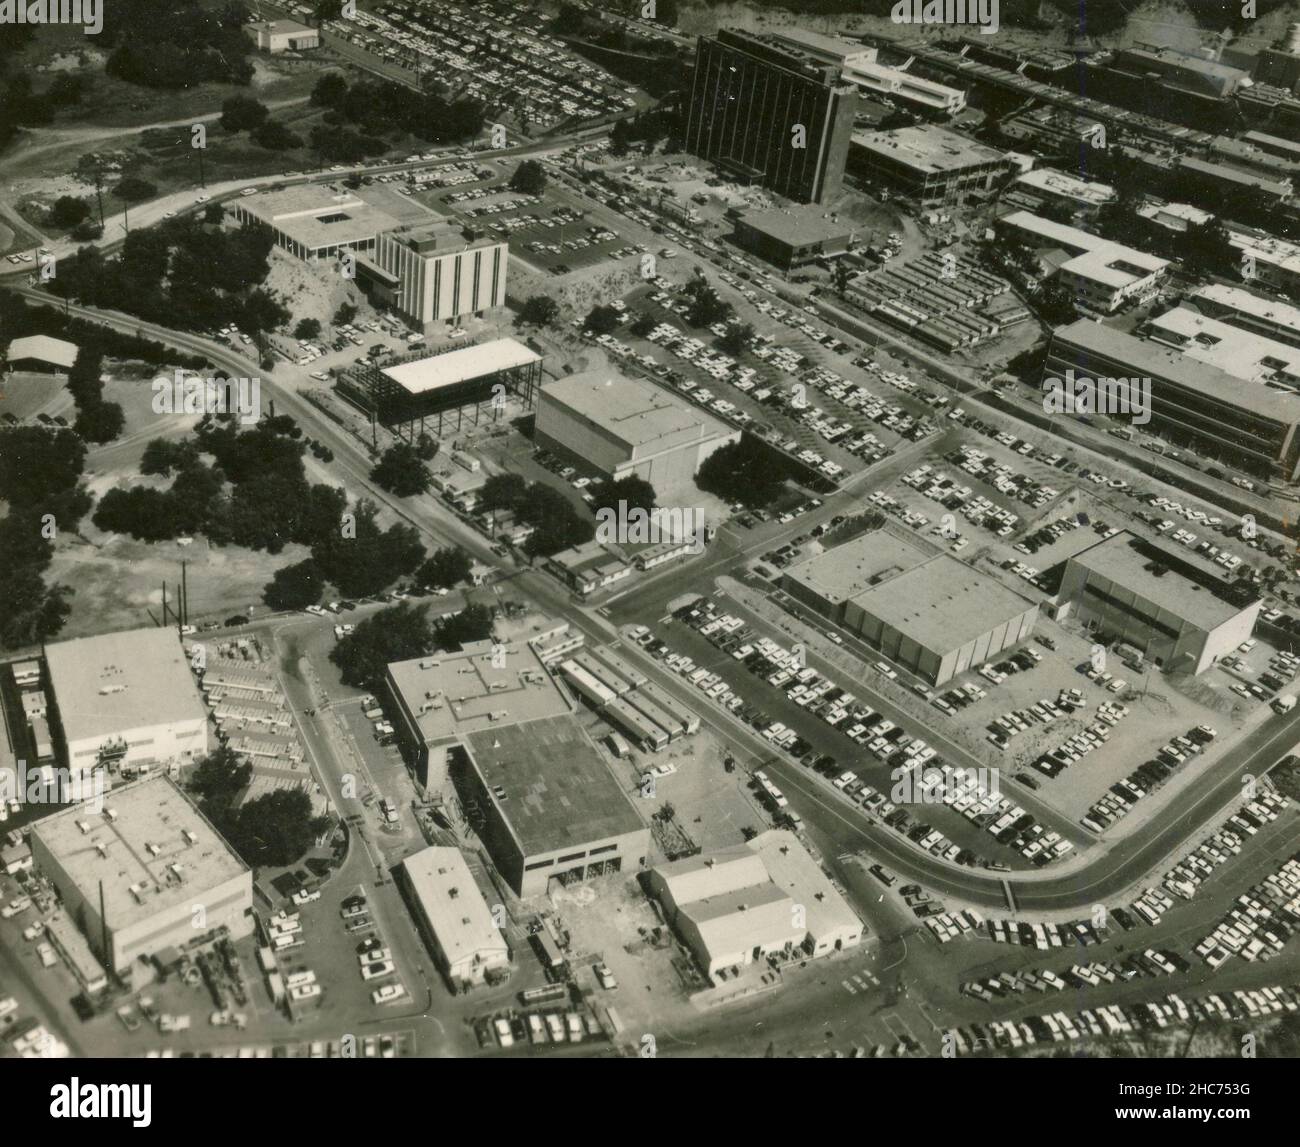 Aerial View of the Jet Propulsion Laboratory Complex at Pasadena, California USA 1950s Stock Photo